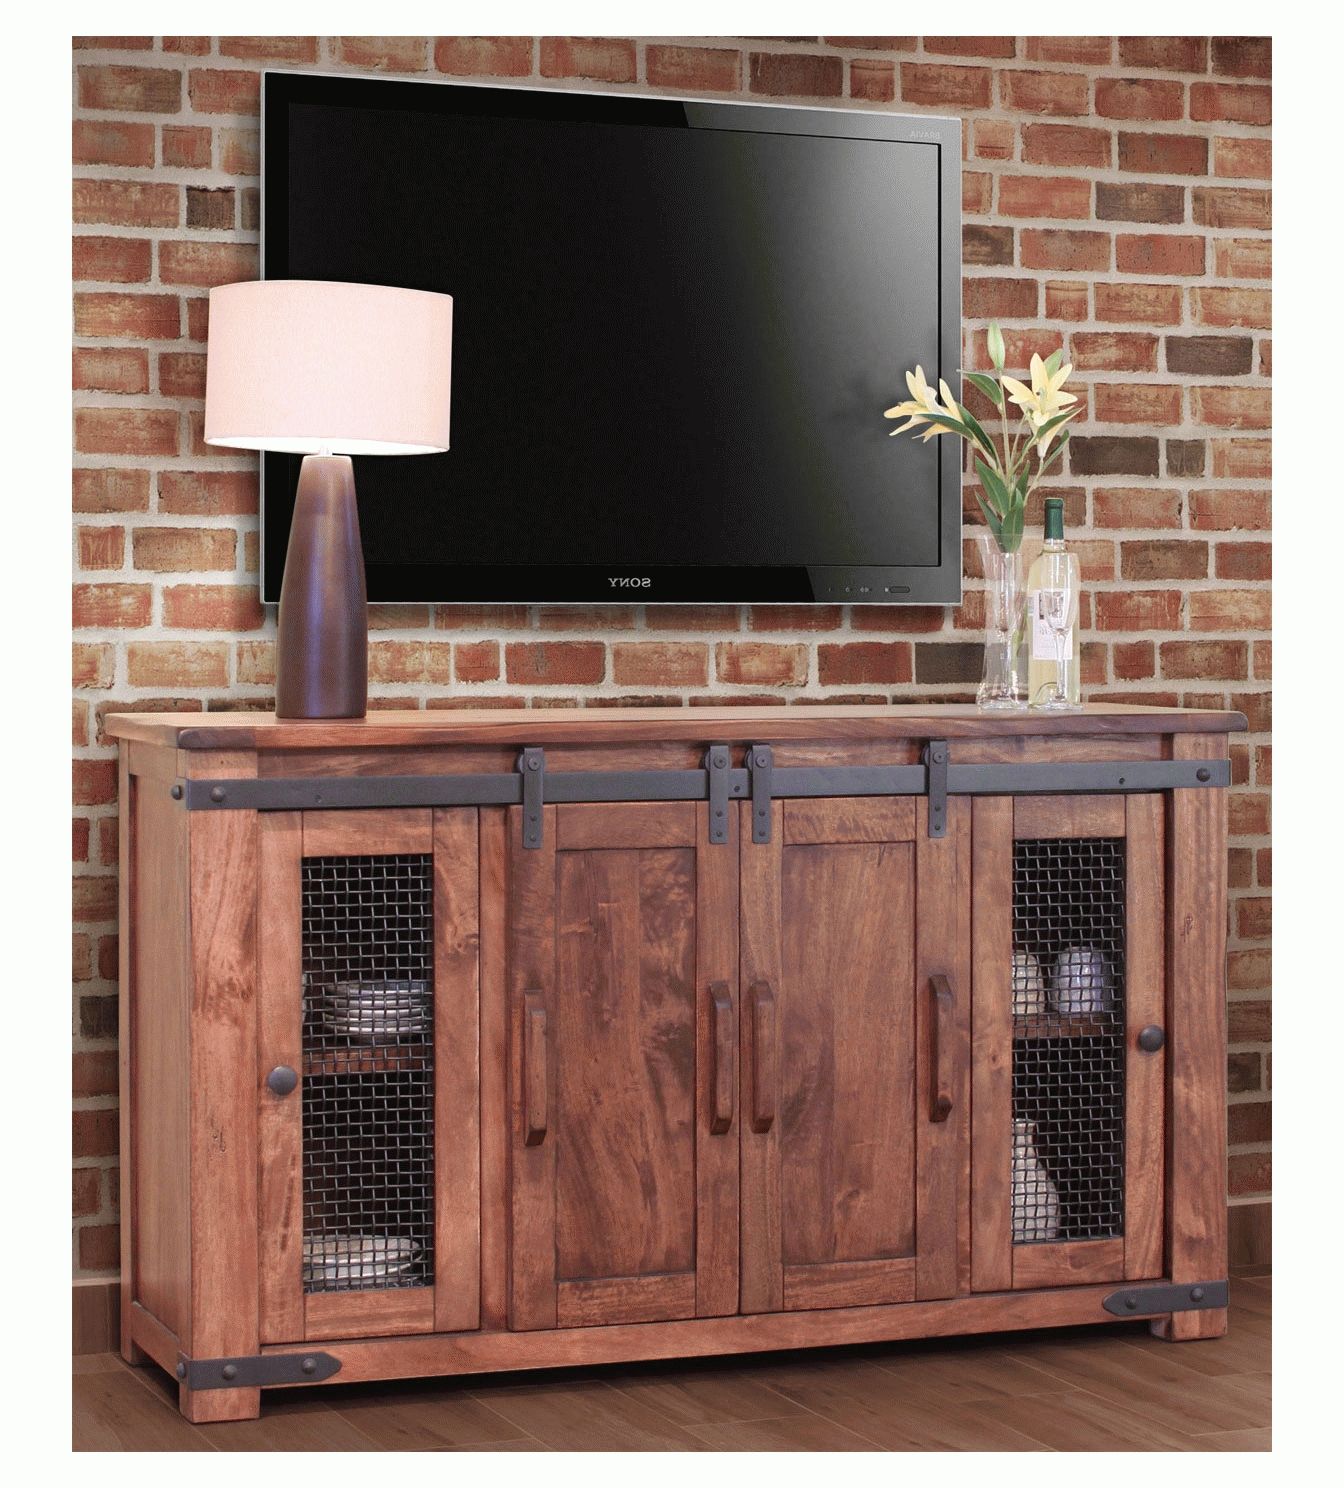 Rustic Barn Door Tv Stand, Barn Door Tv Stand, Barn Door Tv Console Inside Rustic Pine Tv Cabinets (View 3 of 20)